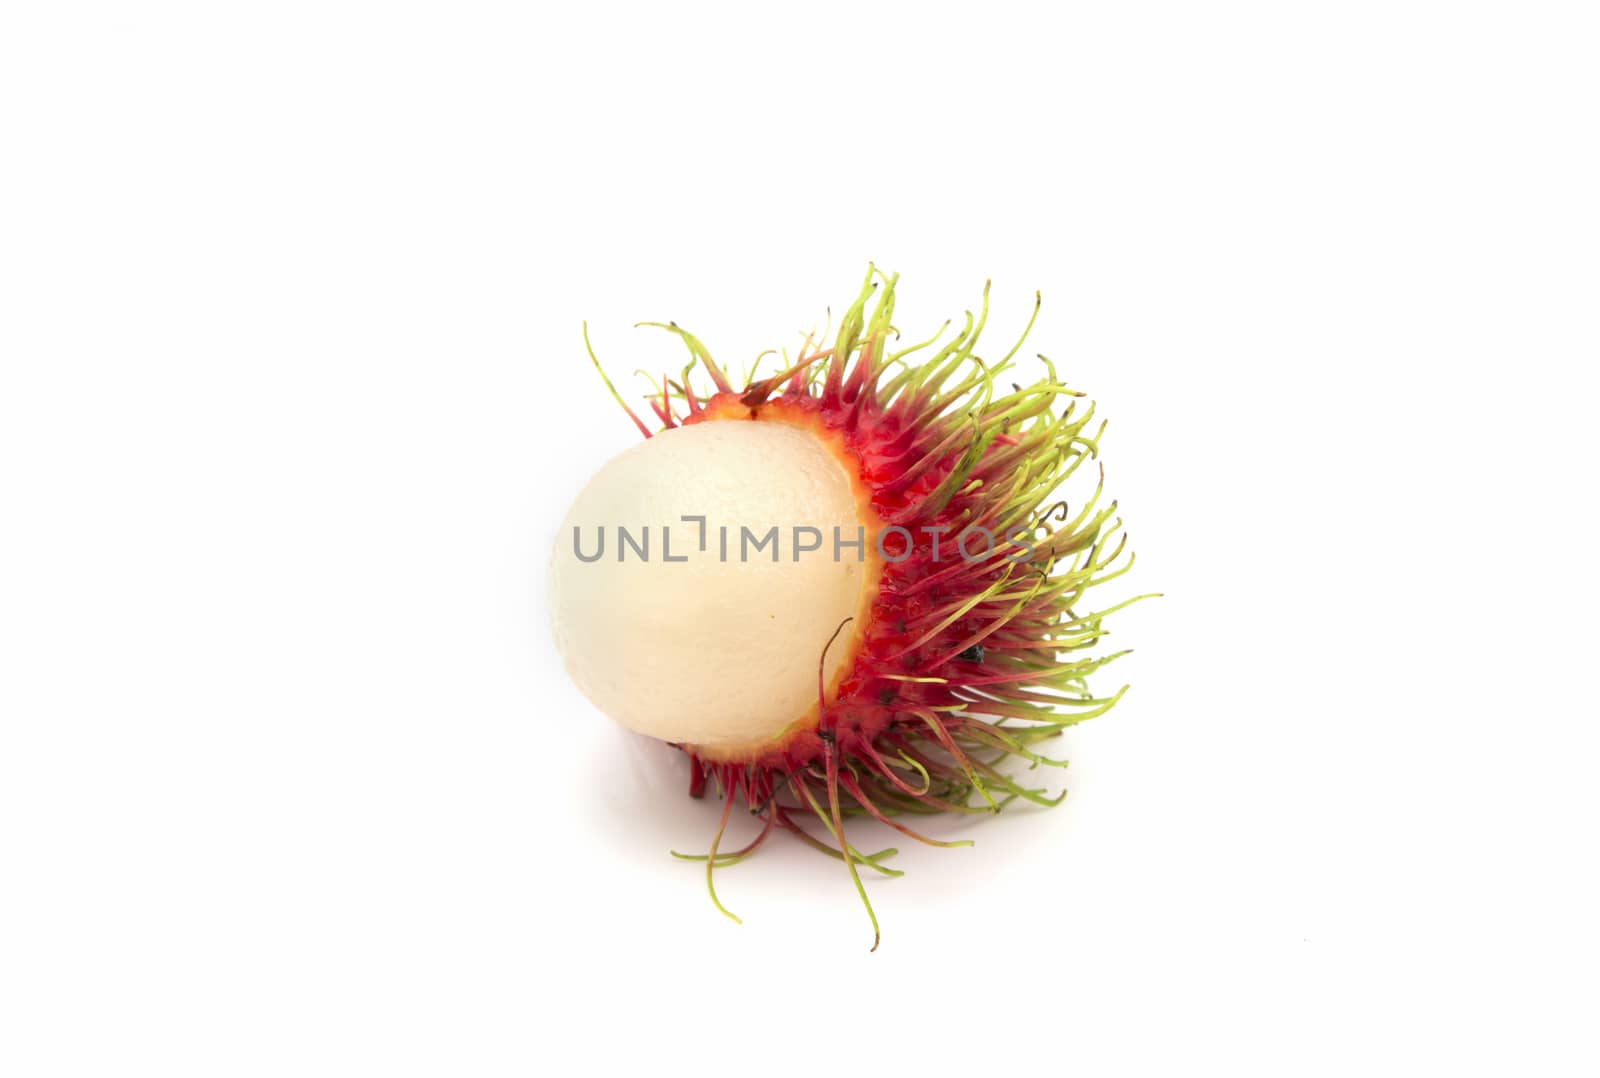 Rambutan fruit with red shell  on white background